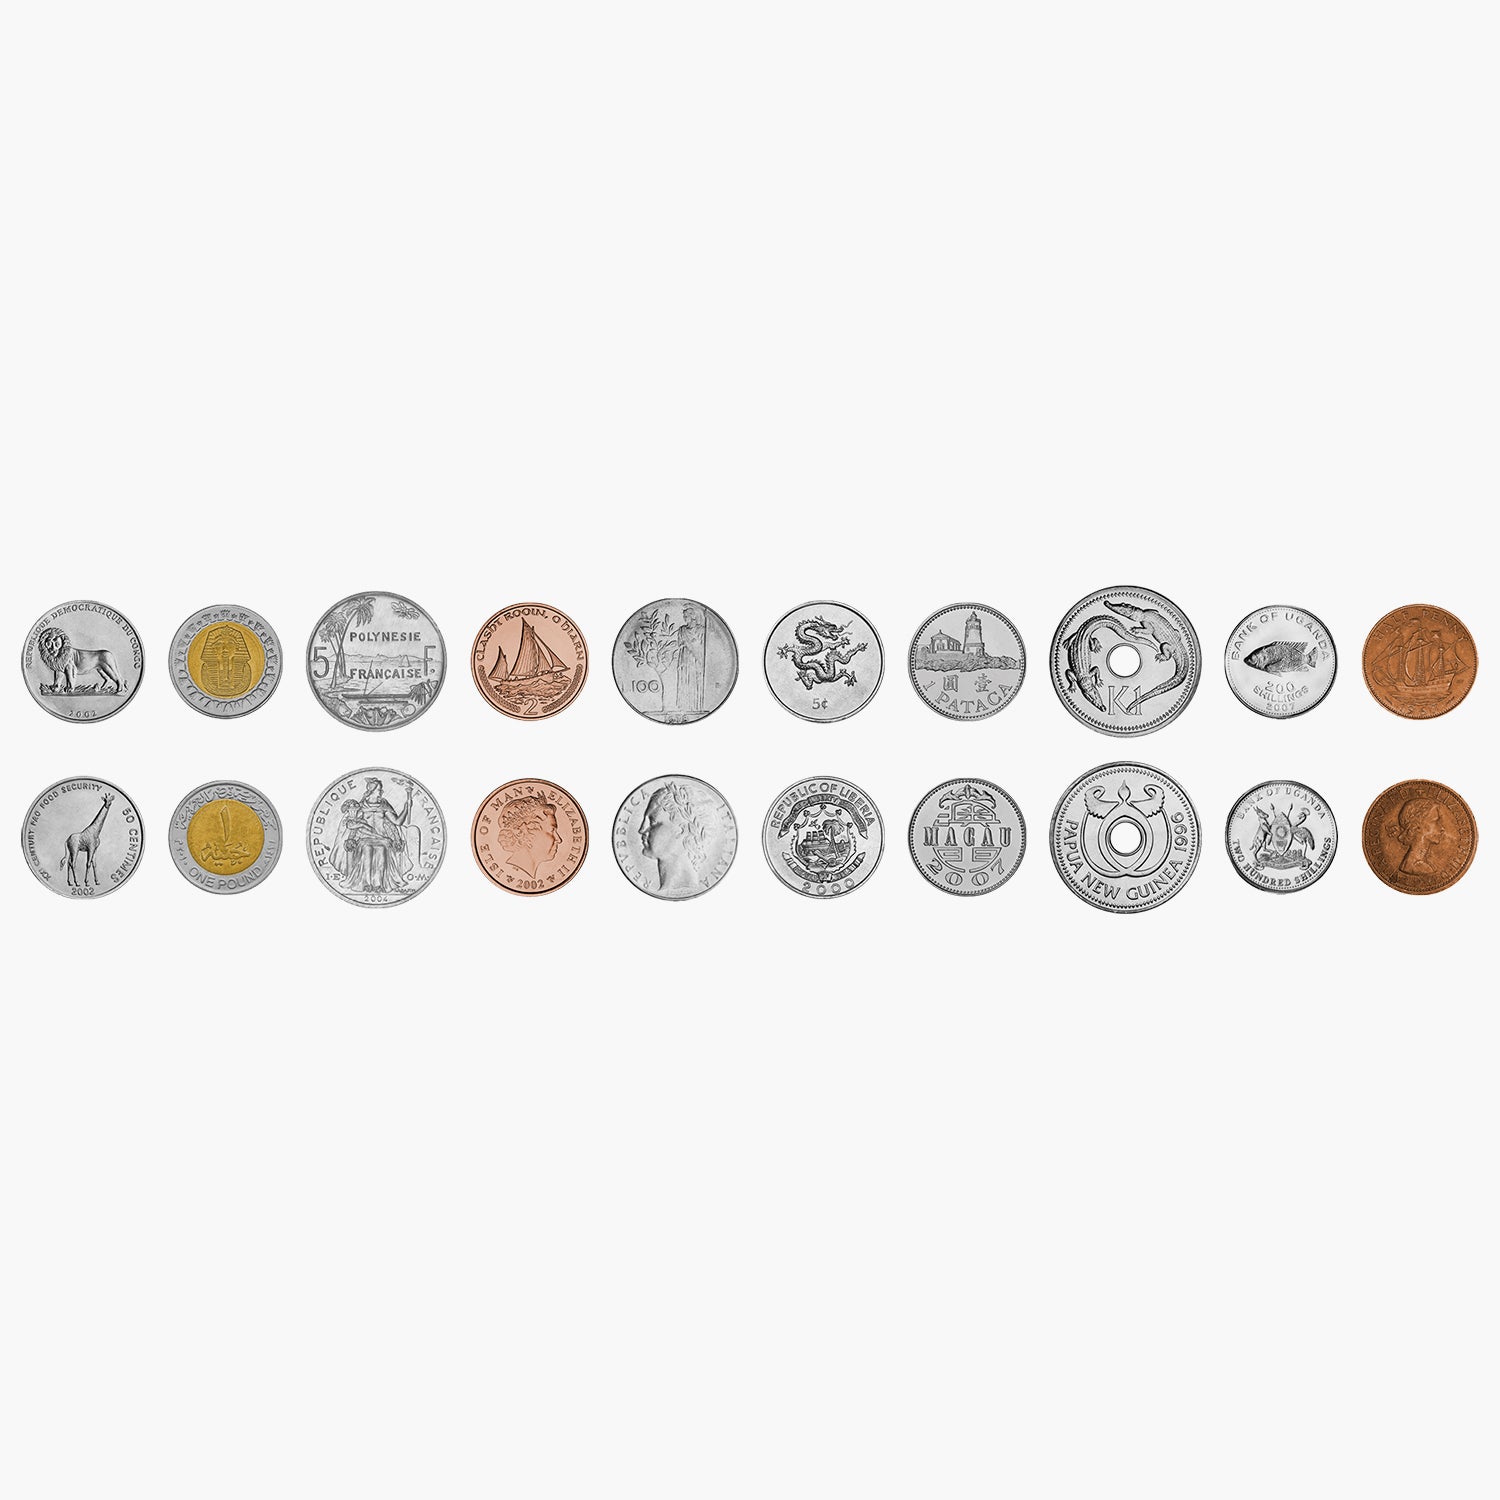 Matching Coins Game